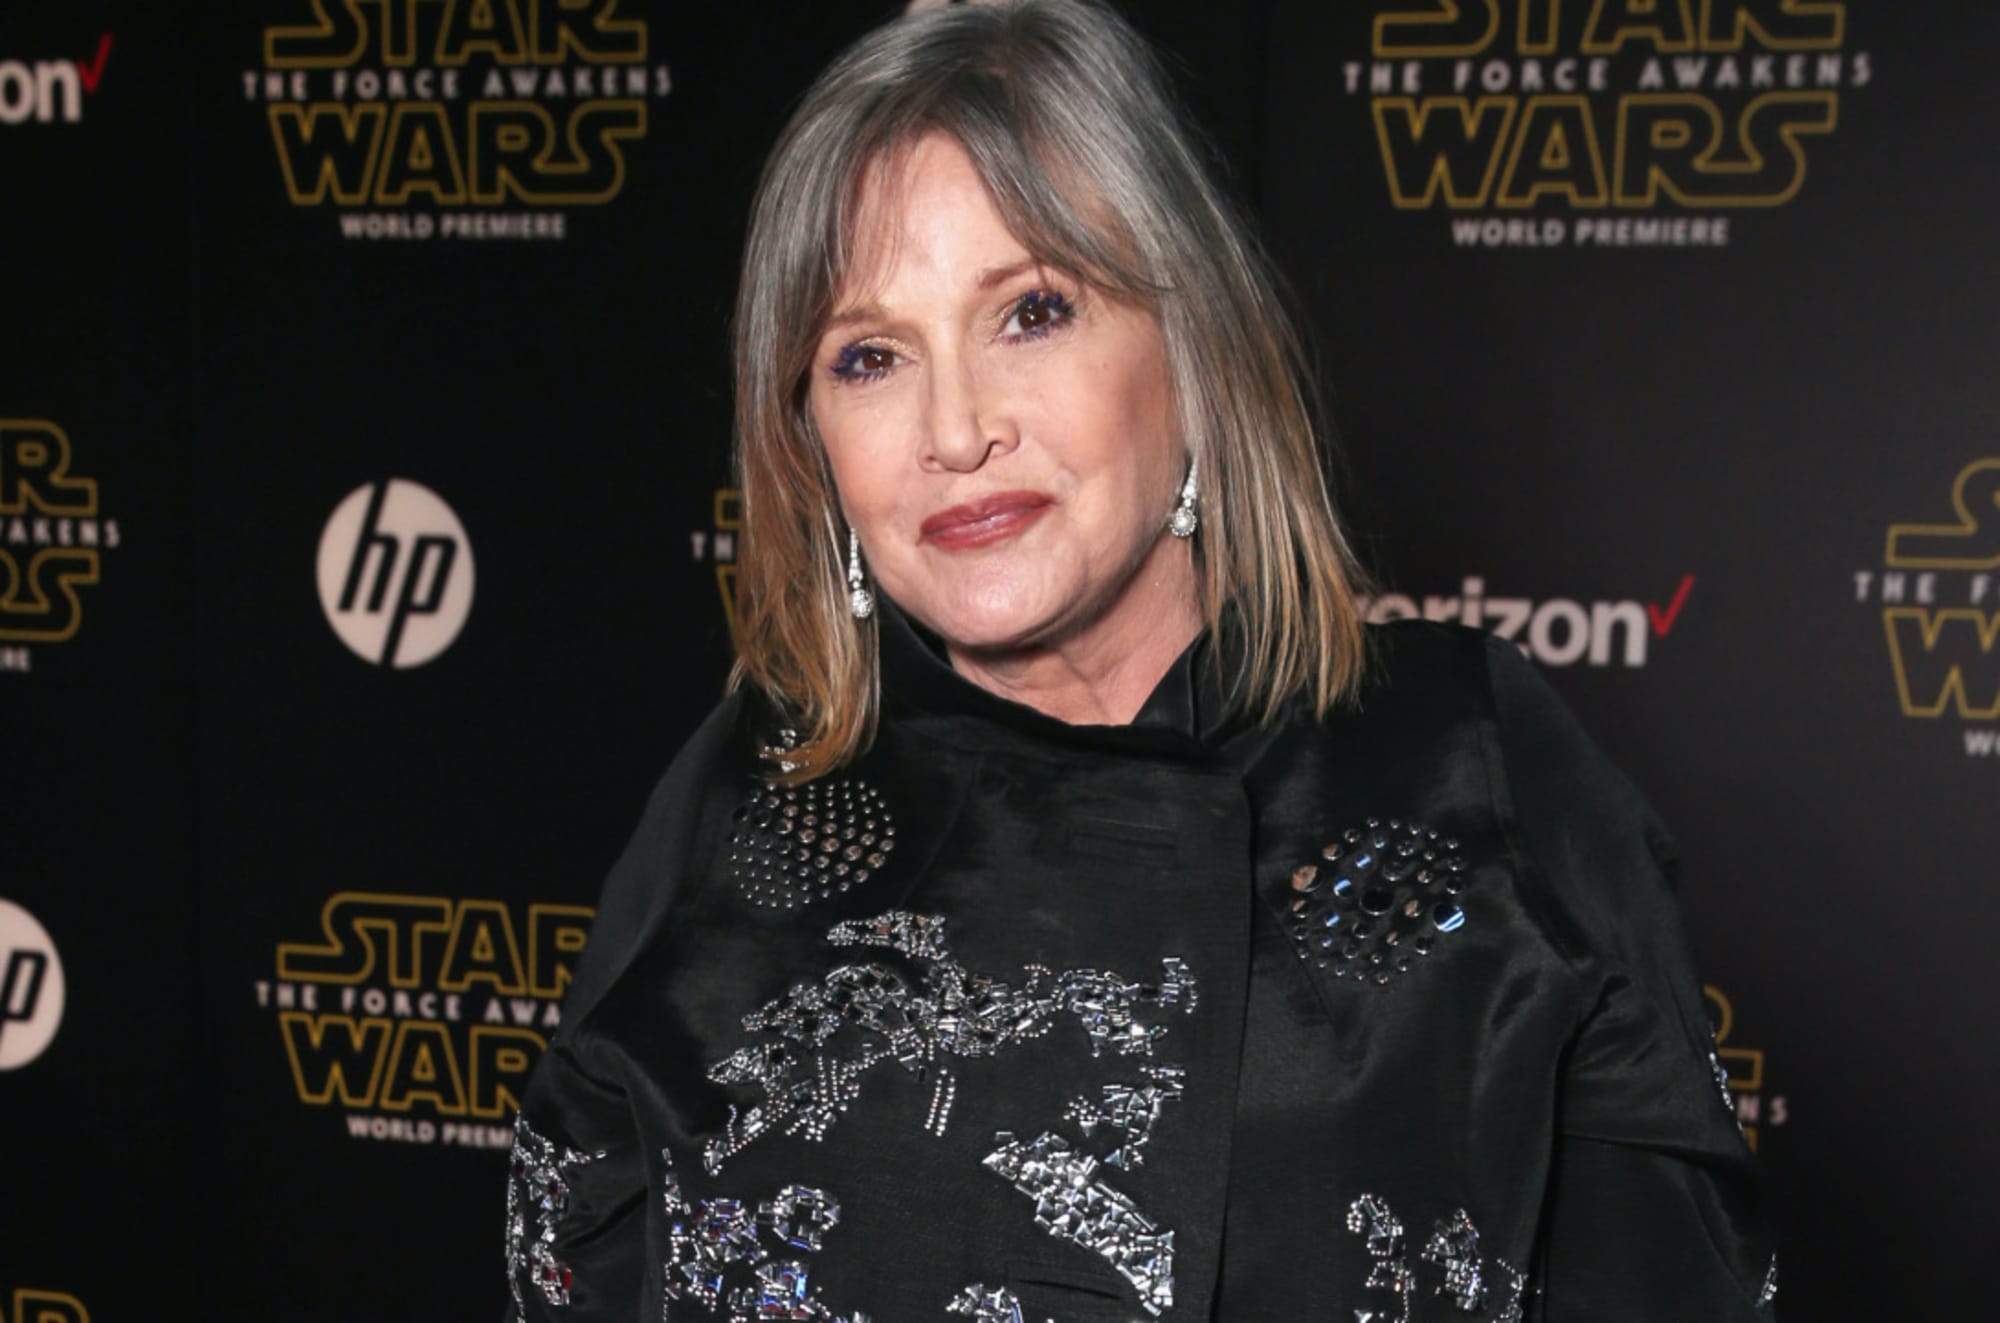 5 little-known facts about Carrie Fisher